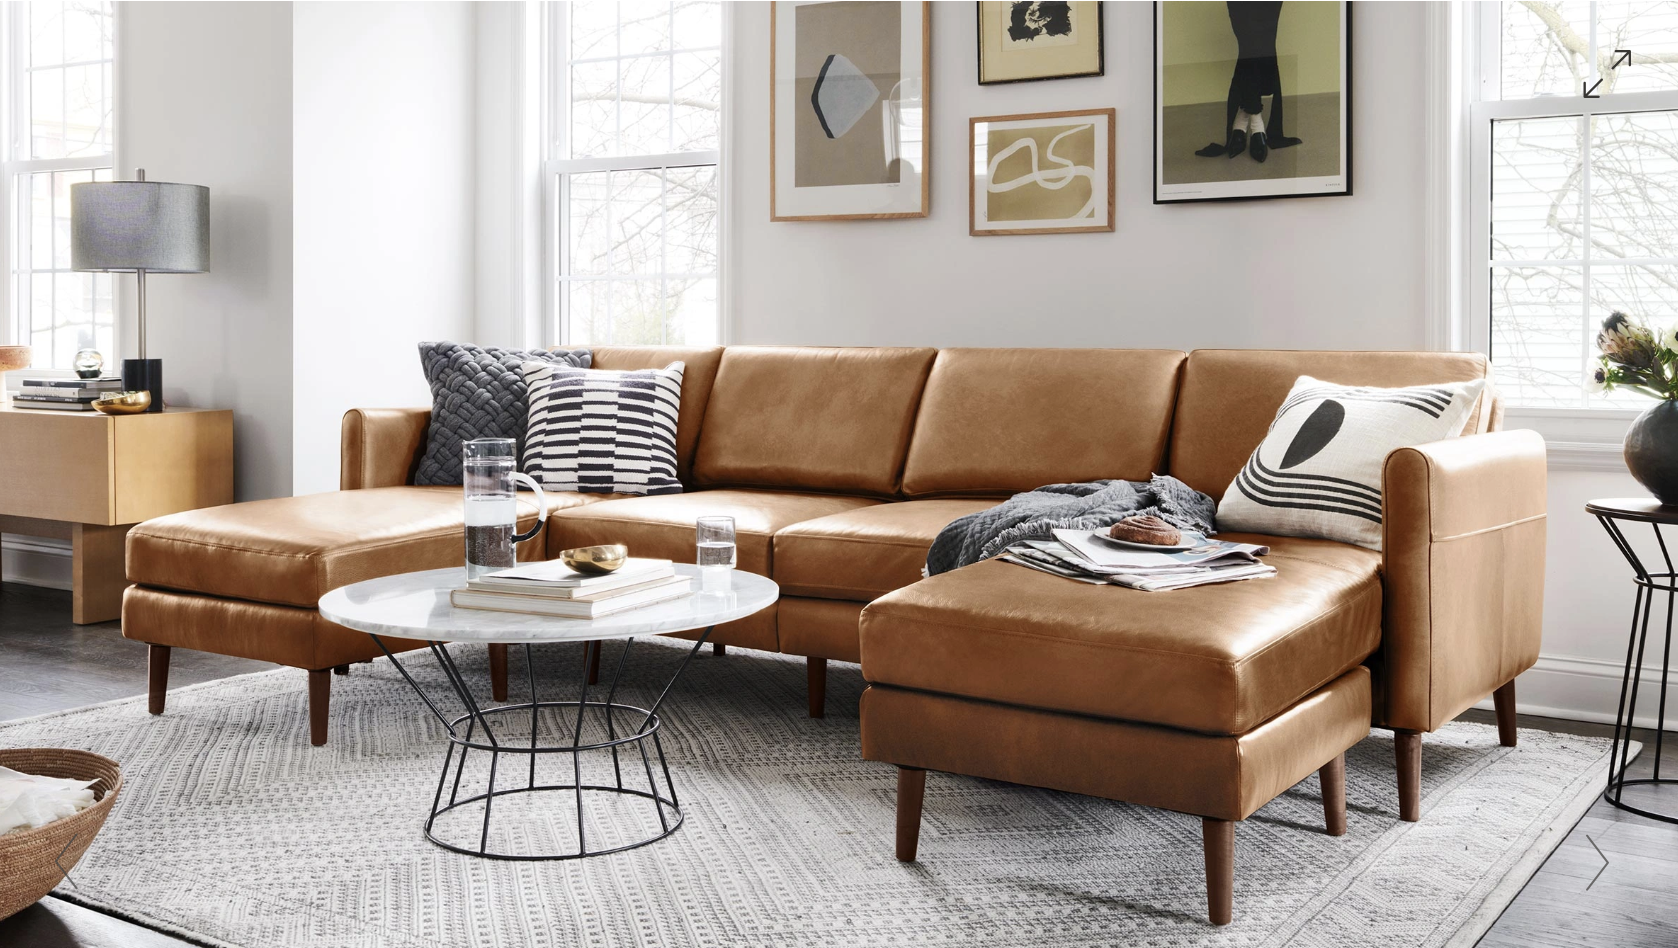 6 Affordable Furniture Brands That Offer Quality and Value - The